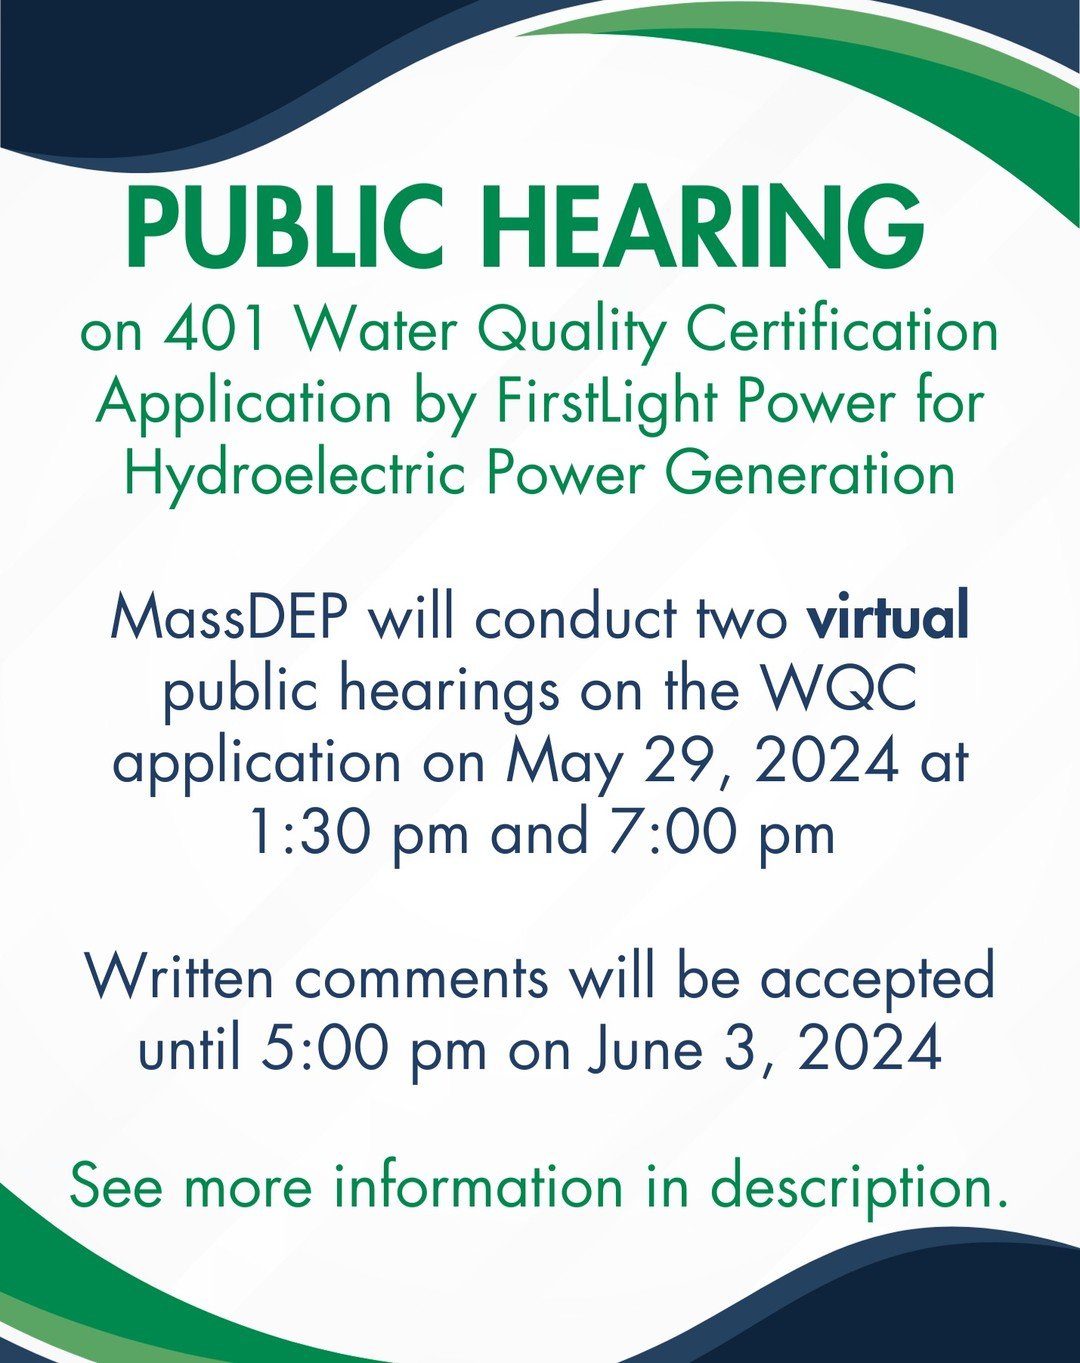 More information can be found here:
https://www.mass.gov/info-details/401-wqc-for-the-firstlight-hydroelectric-re-licensing-project